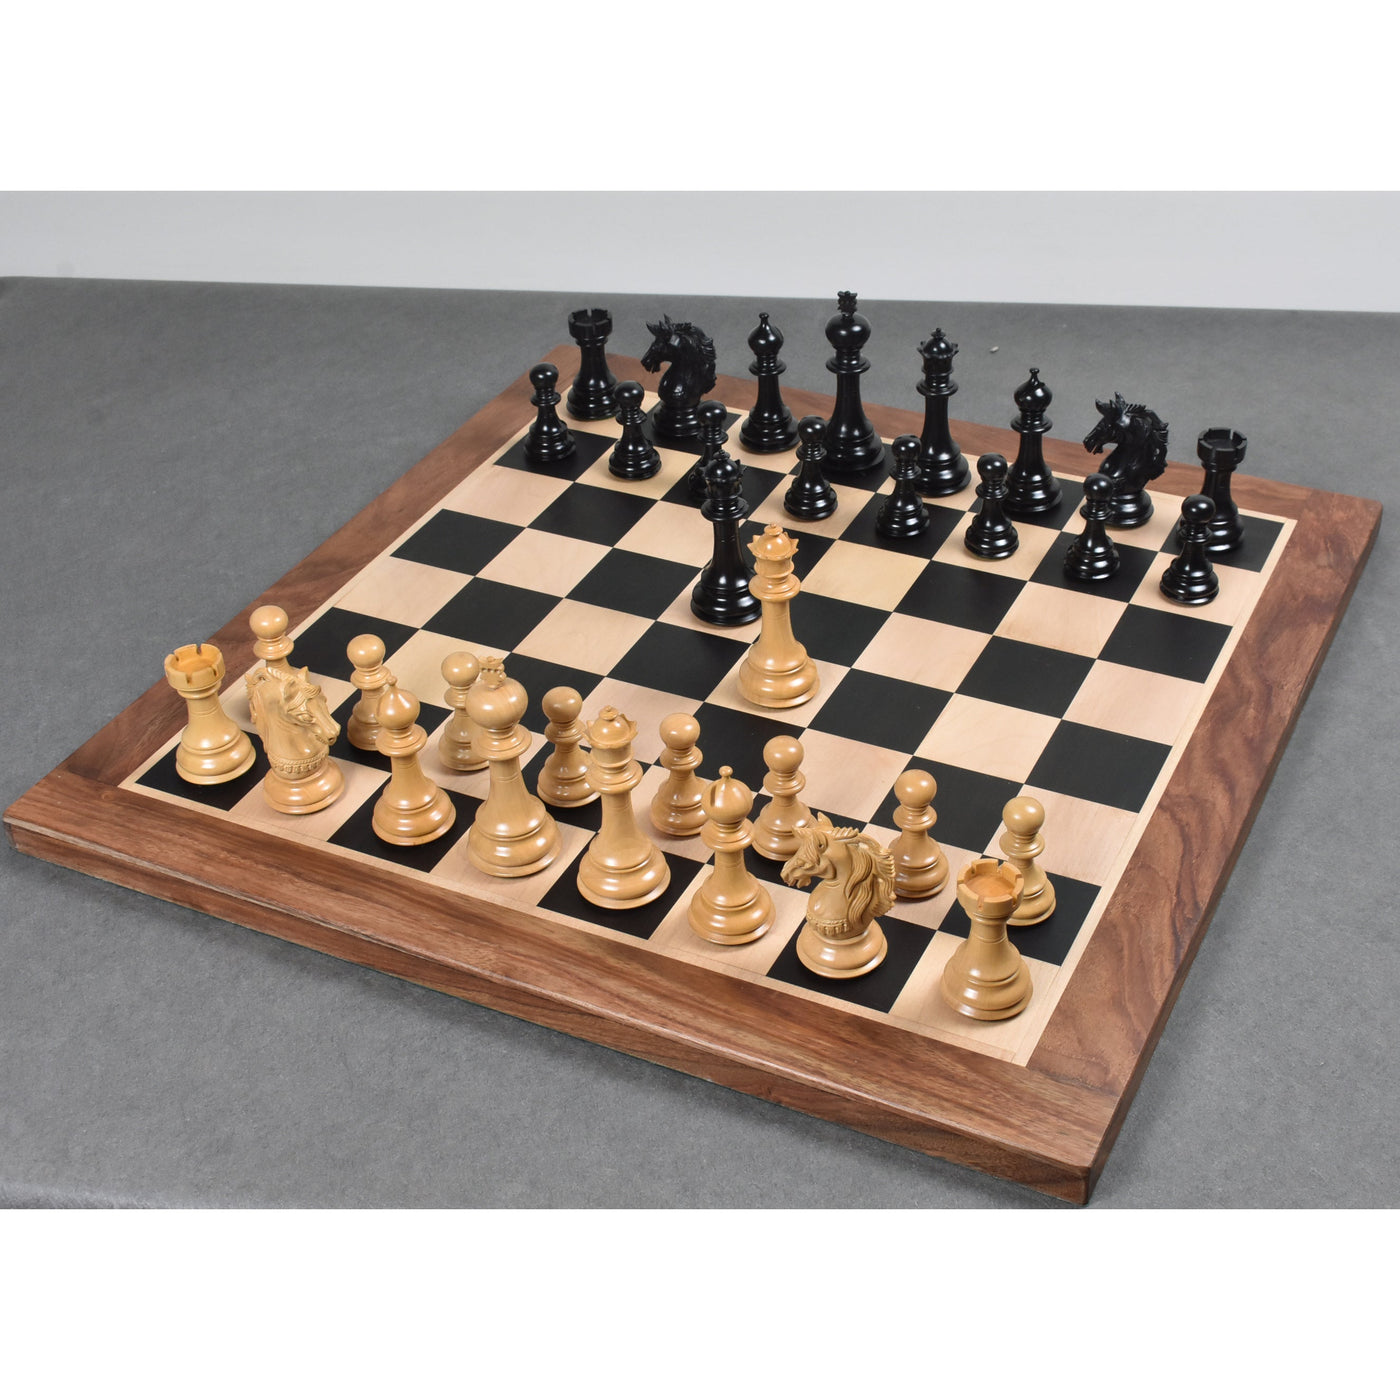 4.6" Prestige Luxury Staunton Chess Set - Chess Pieces Only -Natural Ebony Wood- Triple Weighted